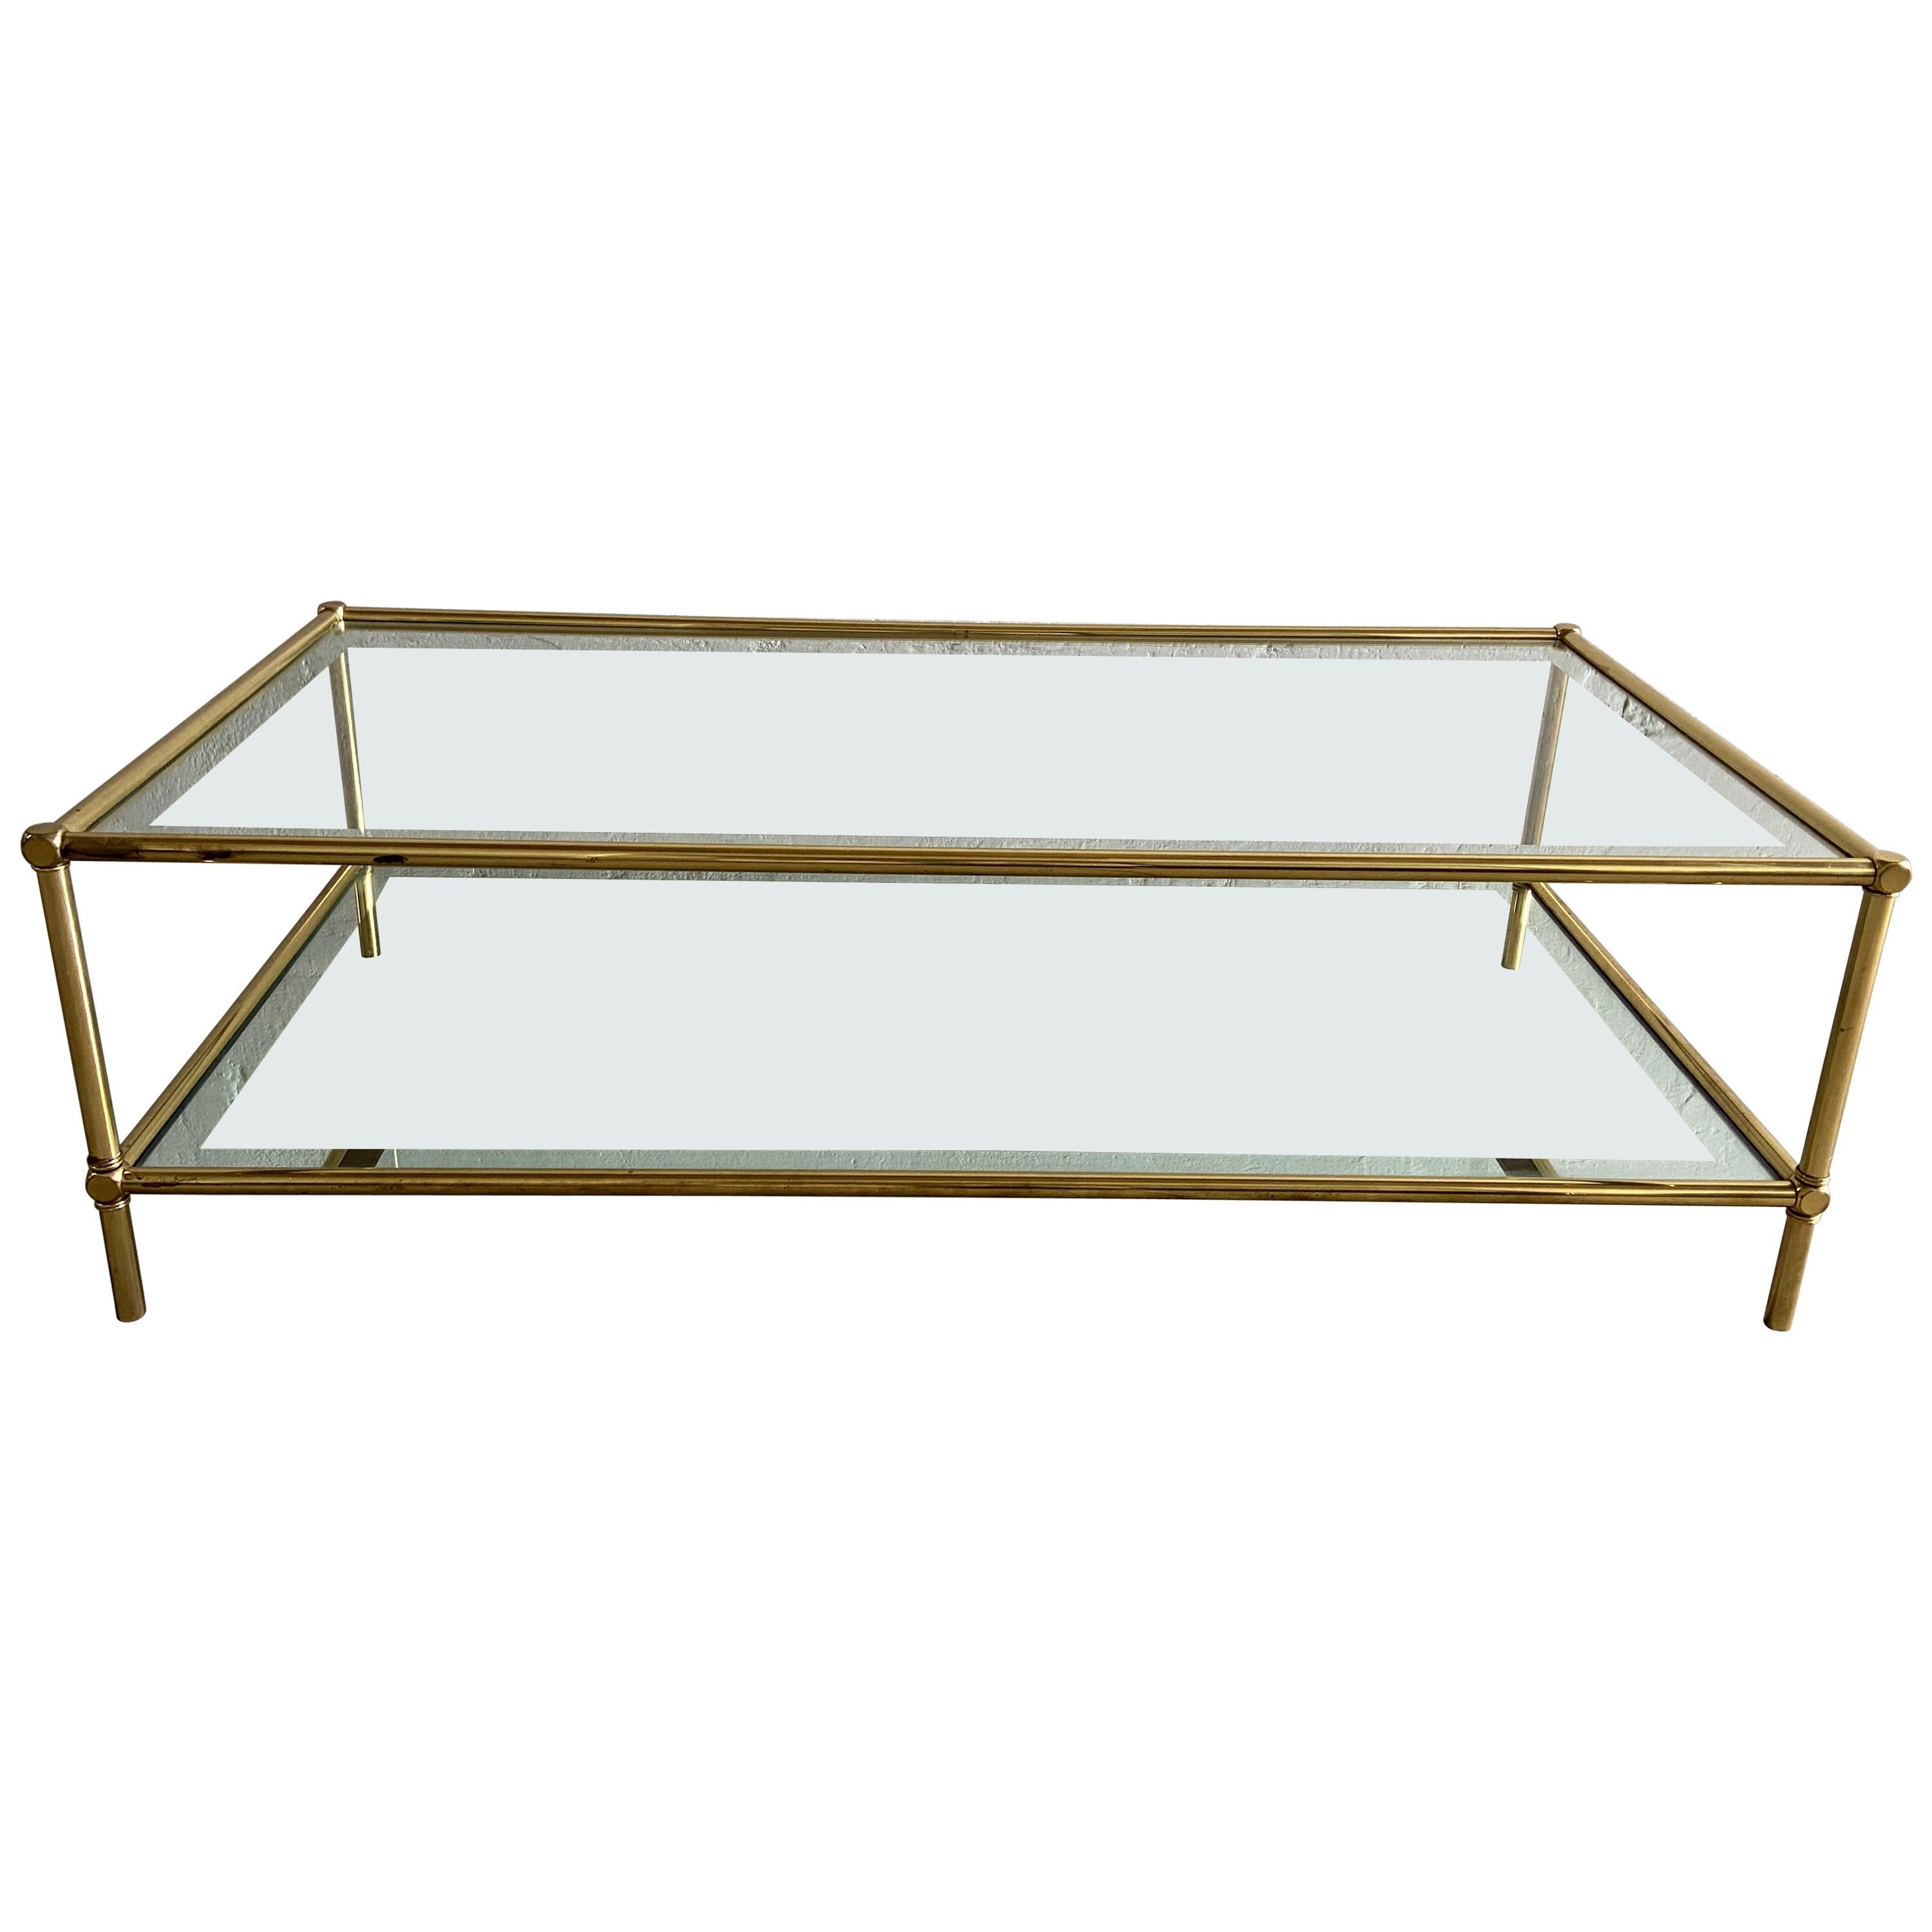 Mid-Century Modern Italian Two-Tier Brass Coffee Table with Mirrored Edge Glass